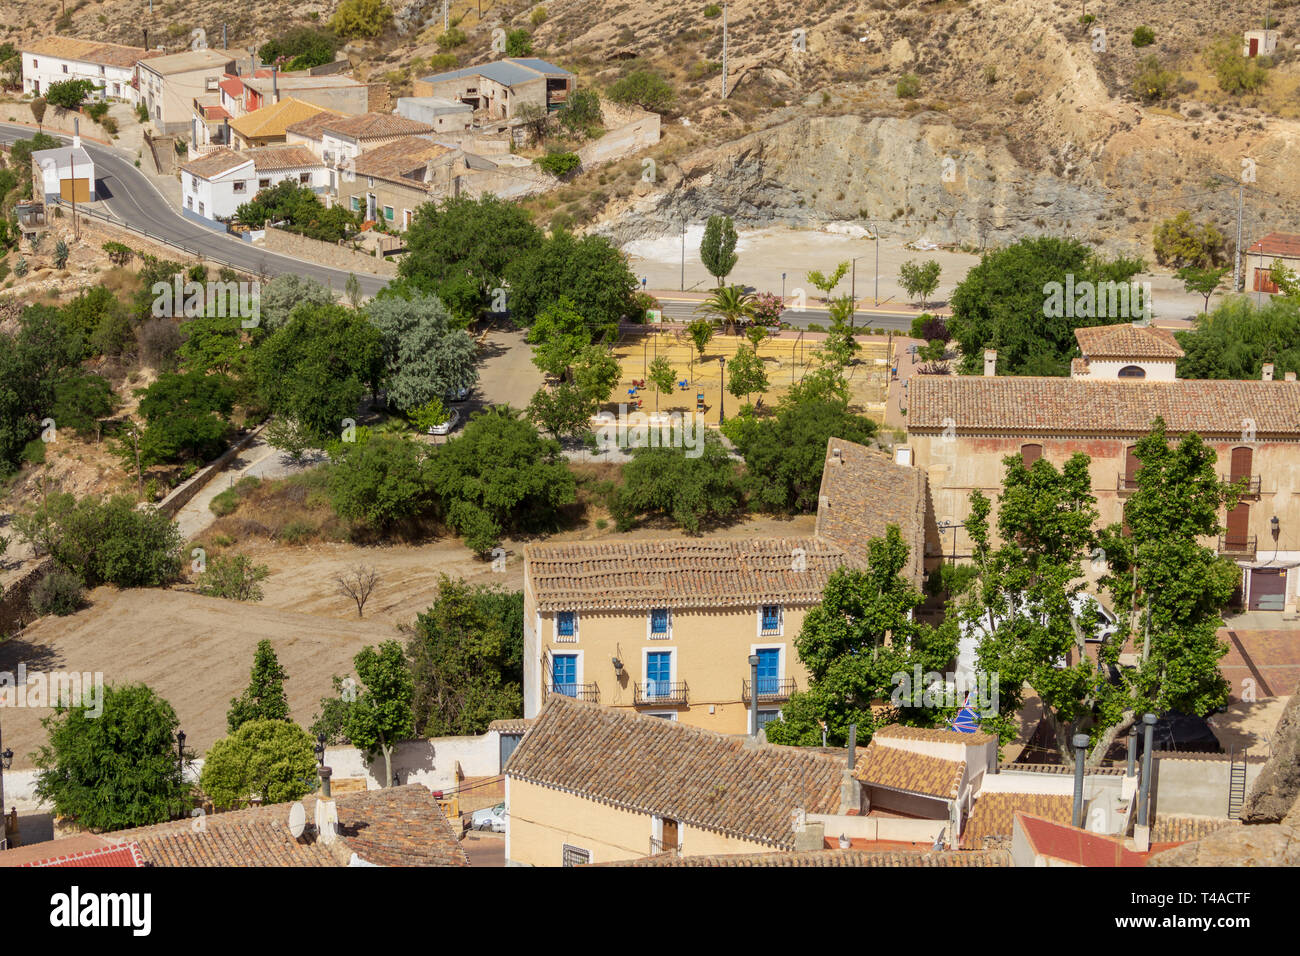 Spanish Houses in Oria a small Rural town in Andalusia Spain Stock Photo